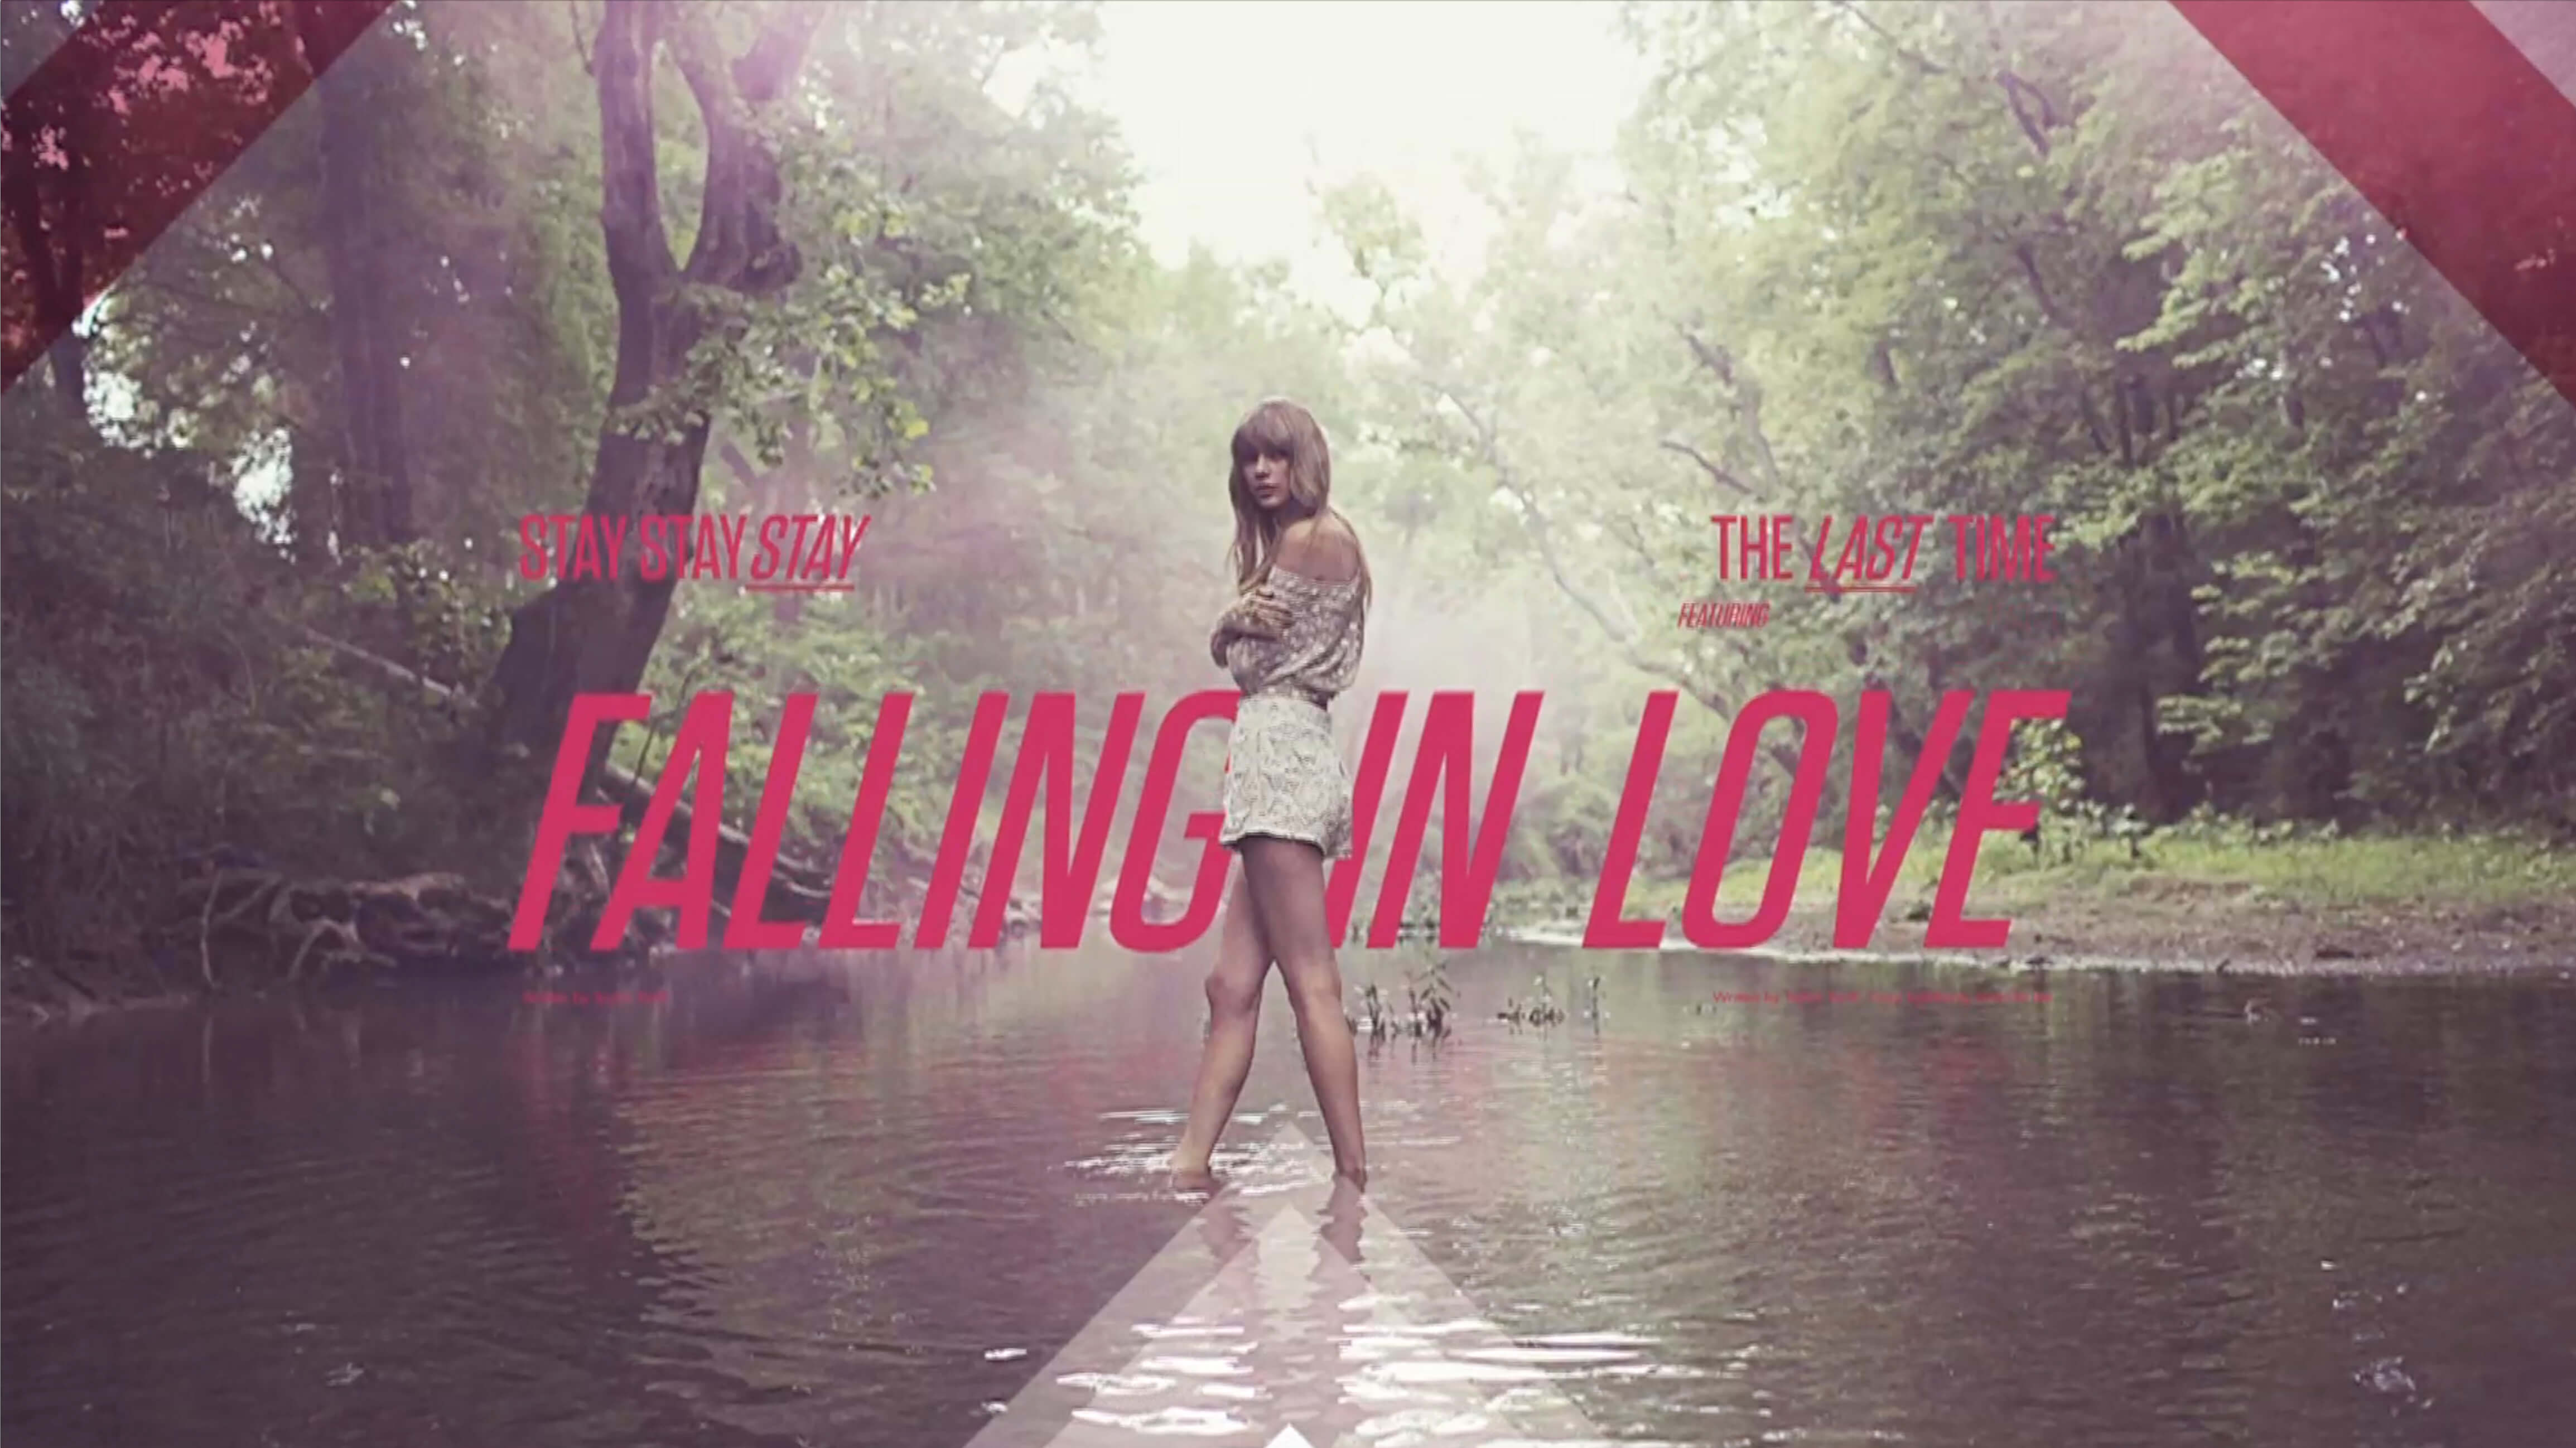 Stay Stay Stay The Last Time Falling in Love supers from New York, NY based Taylor Swift's RED TV Spot designed and animated by Nashville's ST8MNT employing tungsten italic red song titles set against album booklet design elements and photography